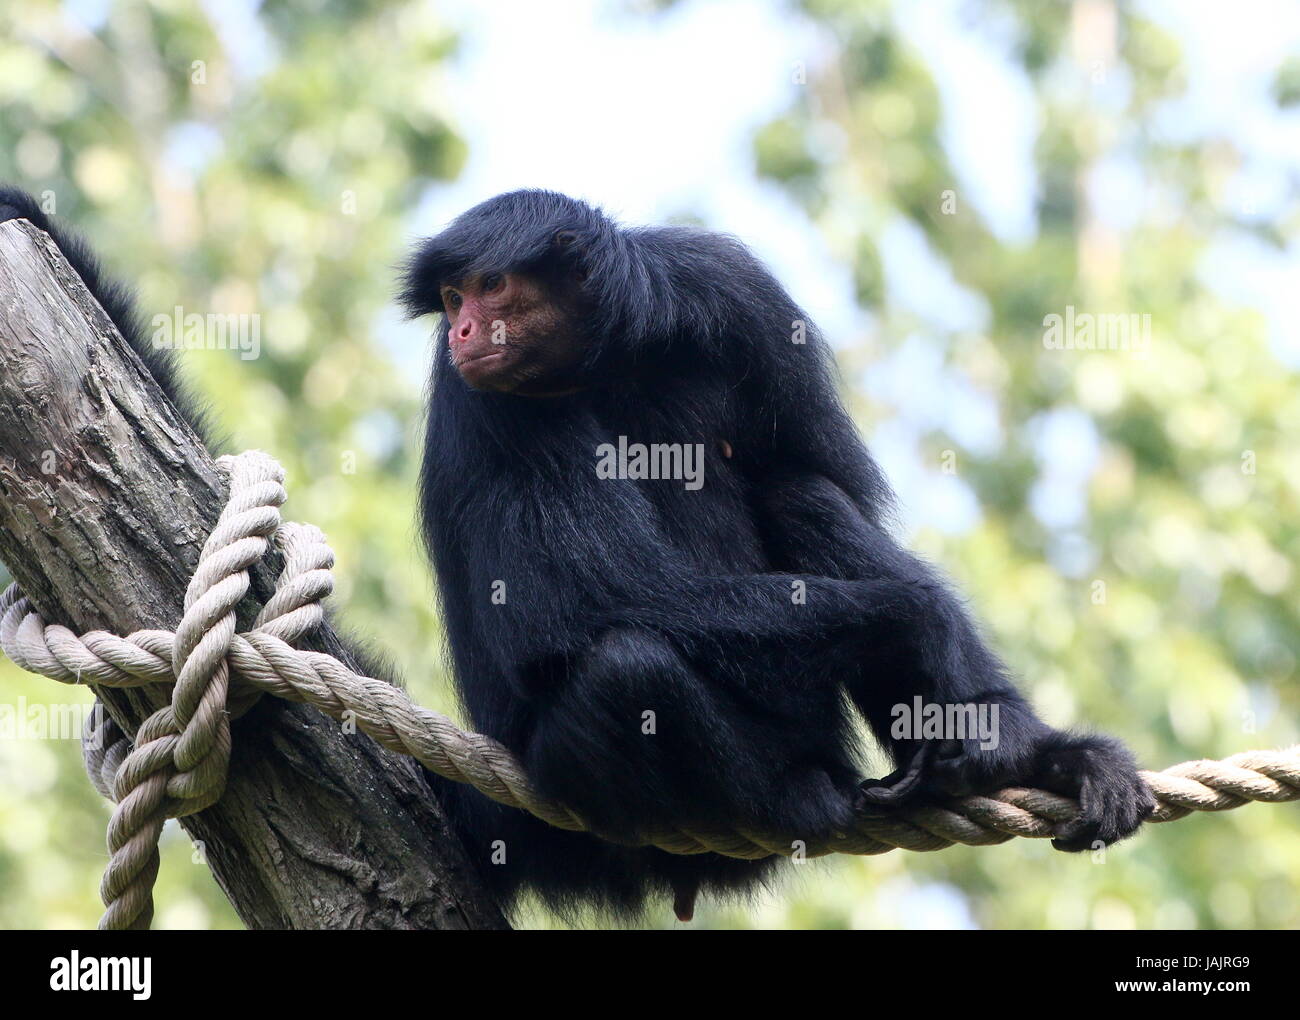 South American Red-Faced Black Spider Monkey (Ateles paniscus) a.k.a. Guiana spider monkey (at Gaia Zoo, Kerkrade, The Netherlands) Stock Photo